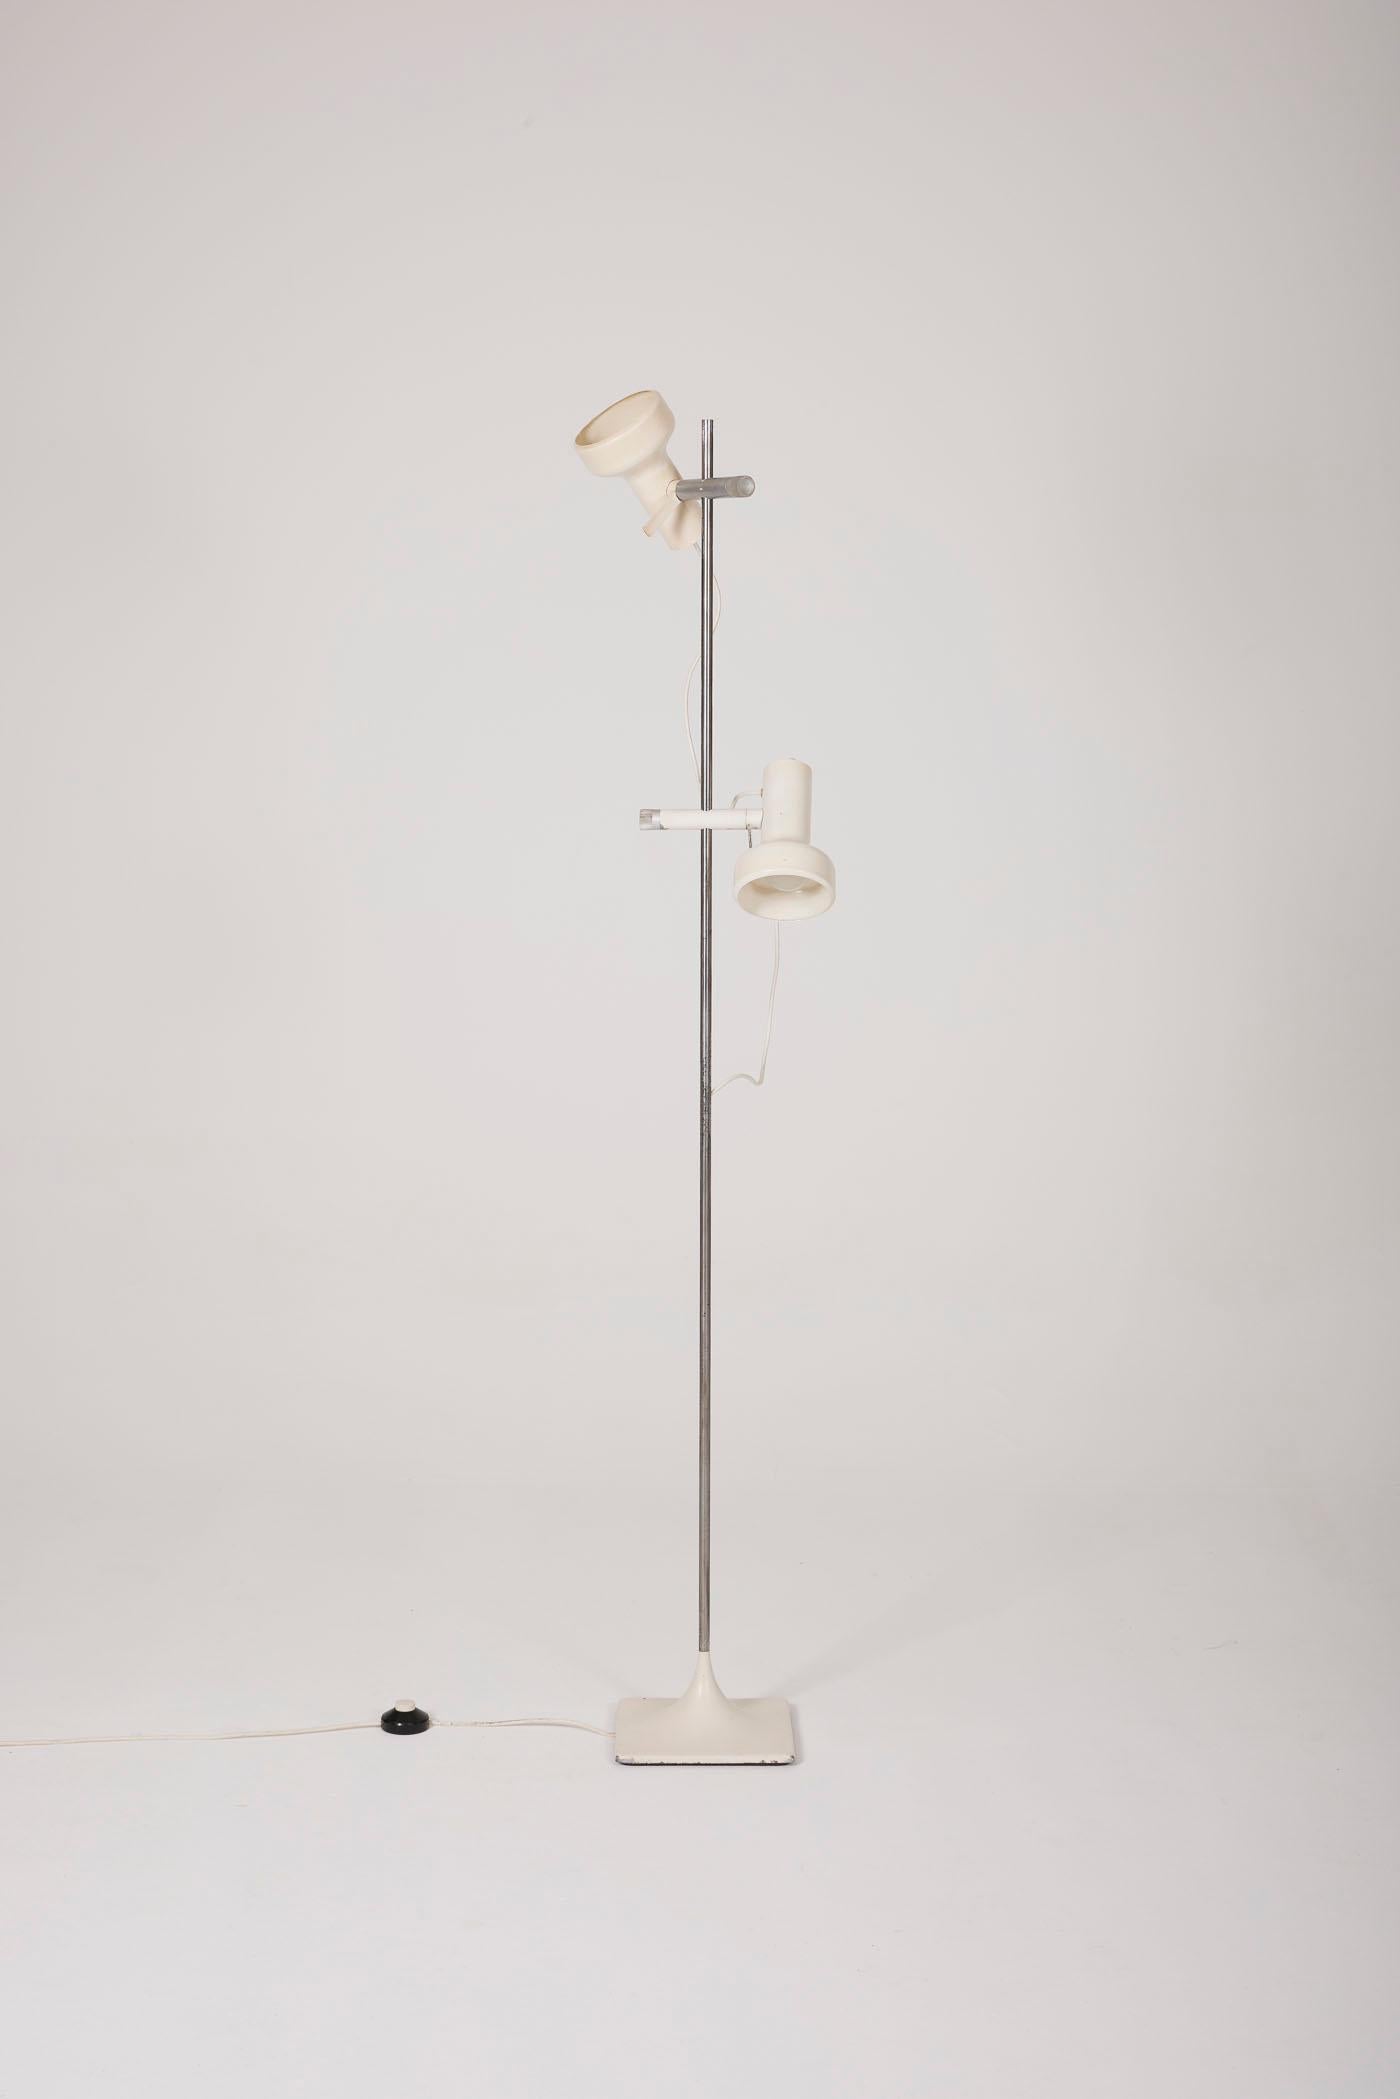 Floor lamp in metal by the French designer Etienne Fermigier for Monix in the 1960s. Good condition.
DV145